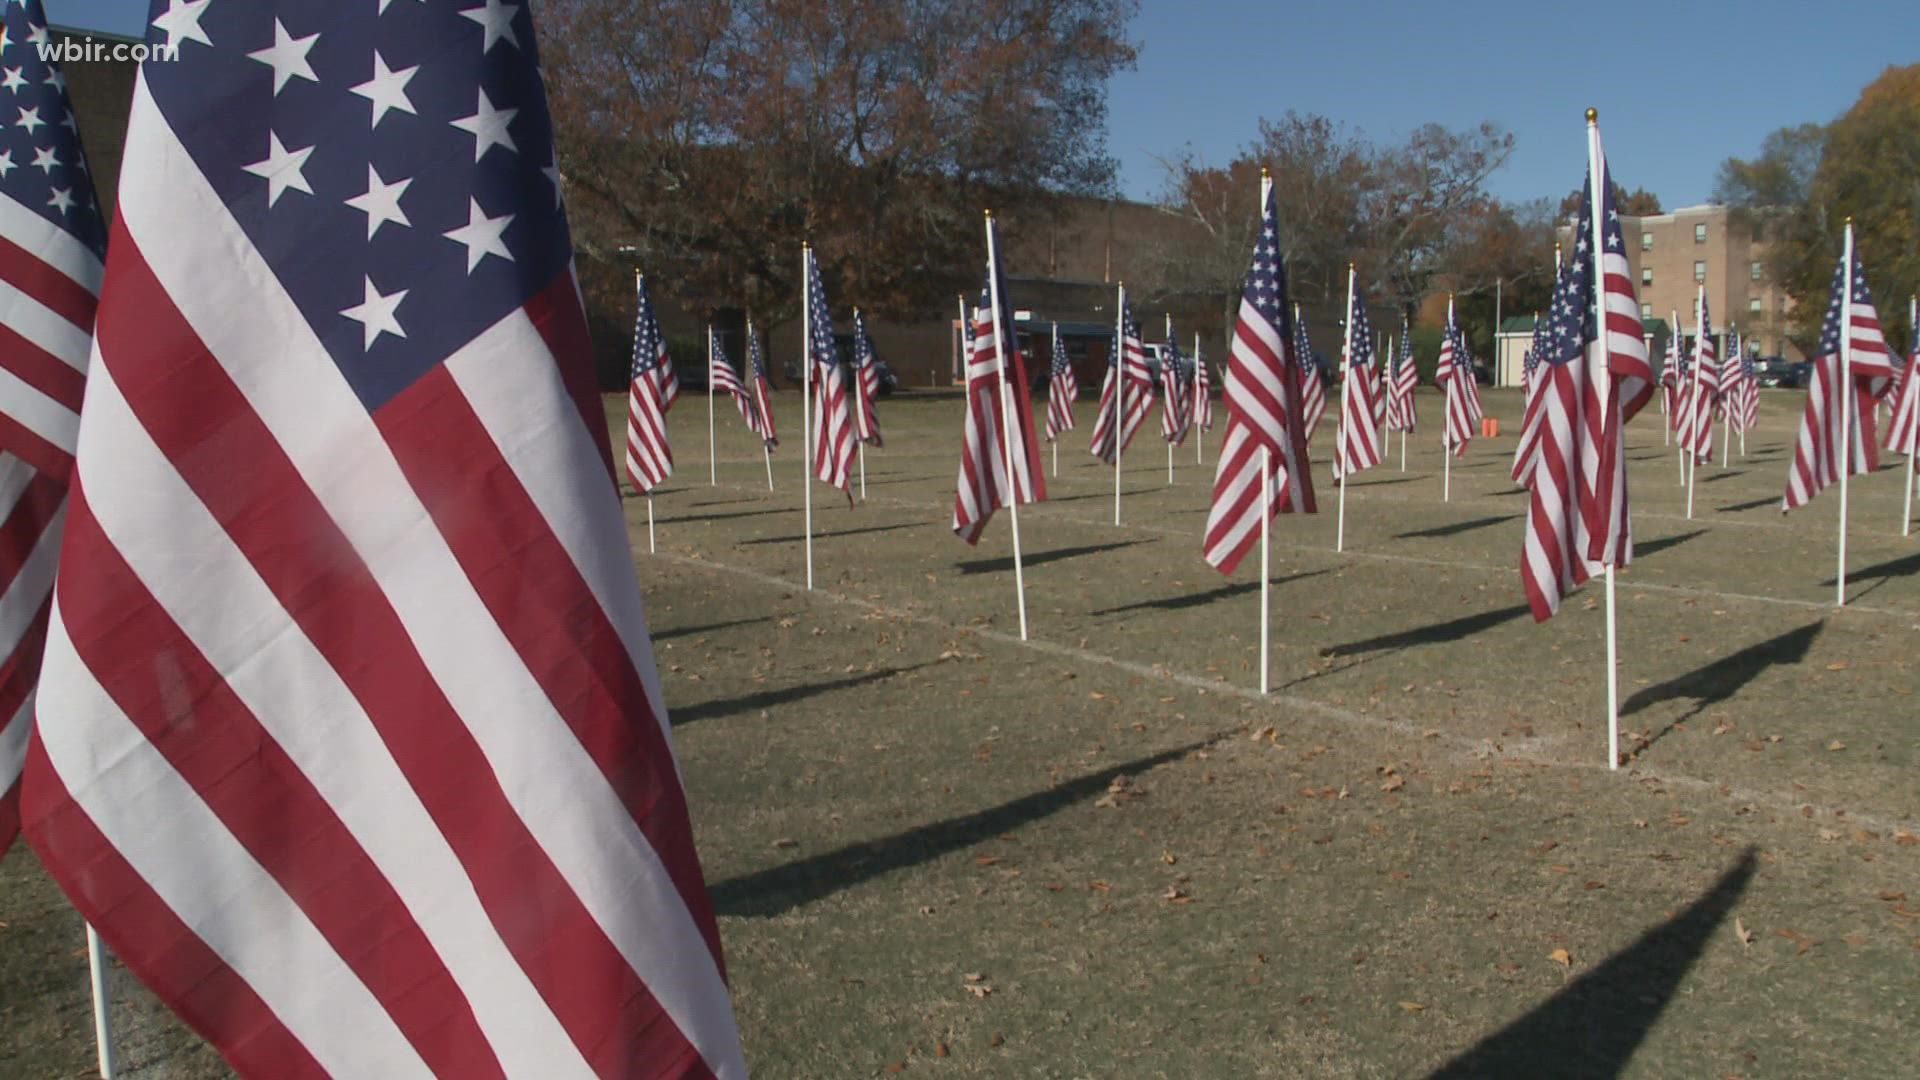 Flags were placed near Maryville College's practice field and flown in formation. Each flag represented a veteran.